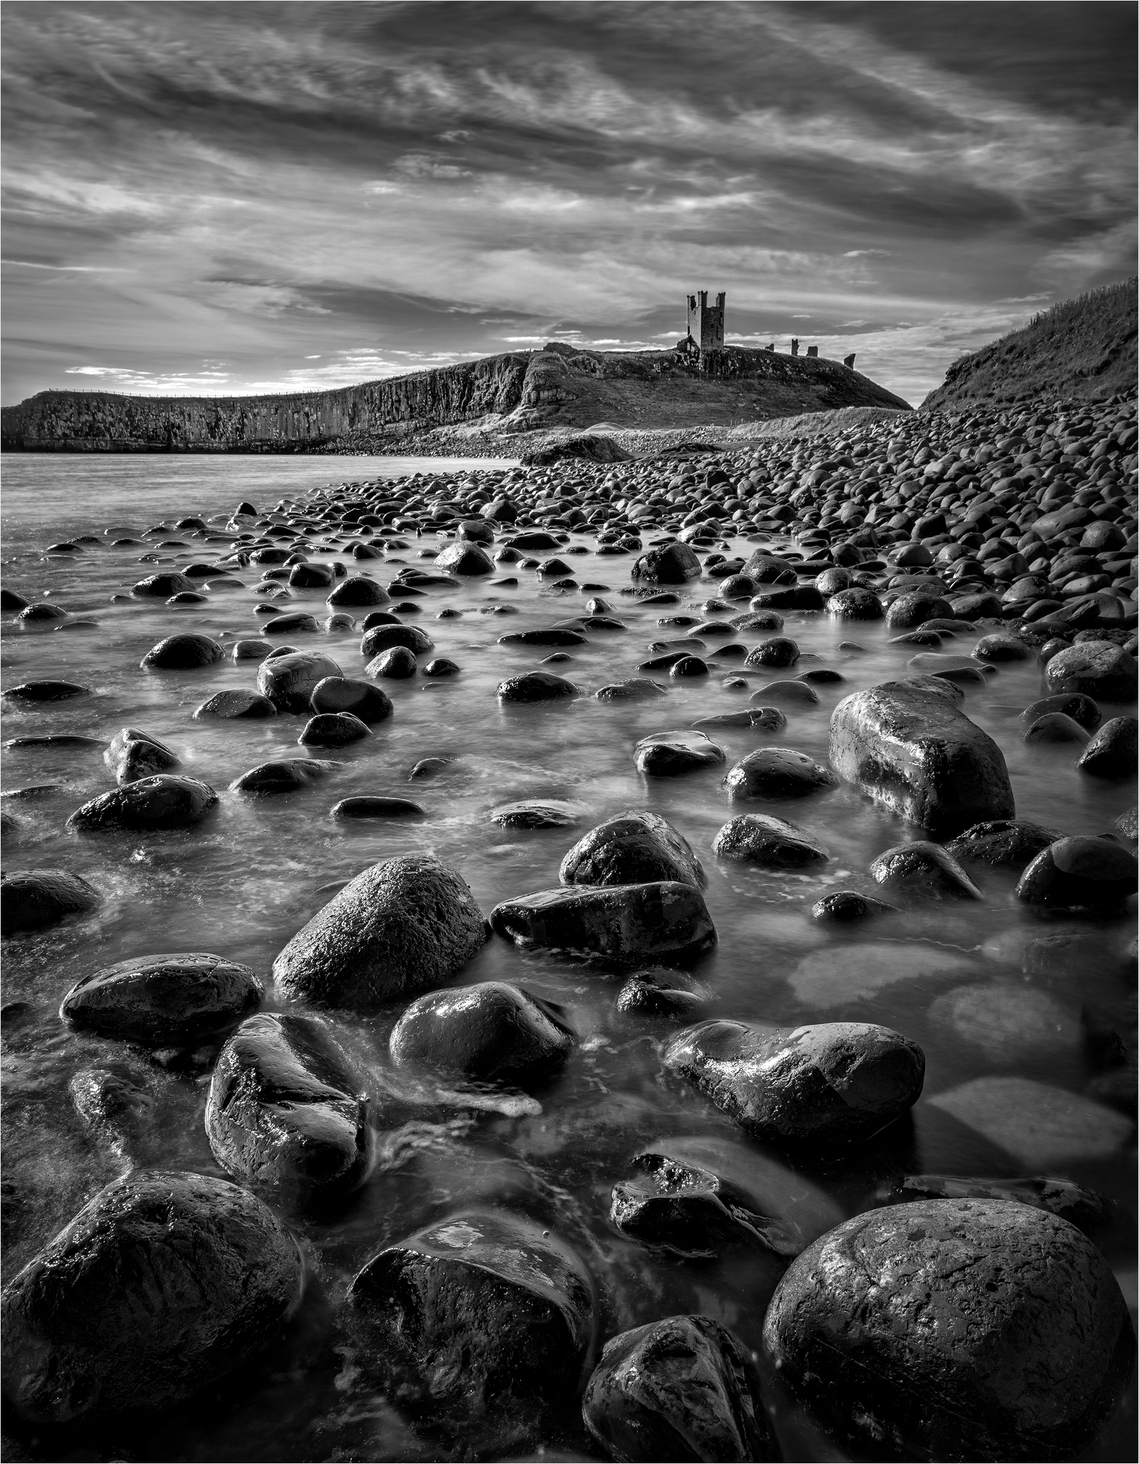 3rd place with 5 points - Dunstanburgh Castle by Kenneth Rennie (1 - Likes)